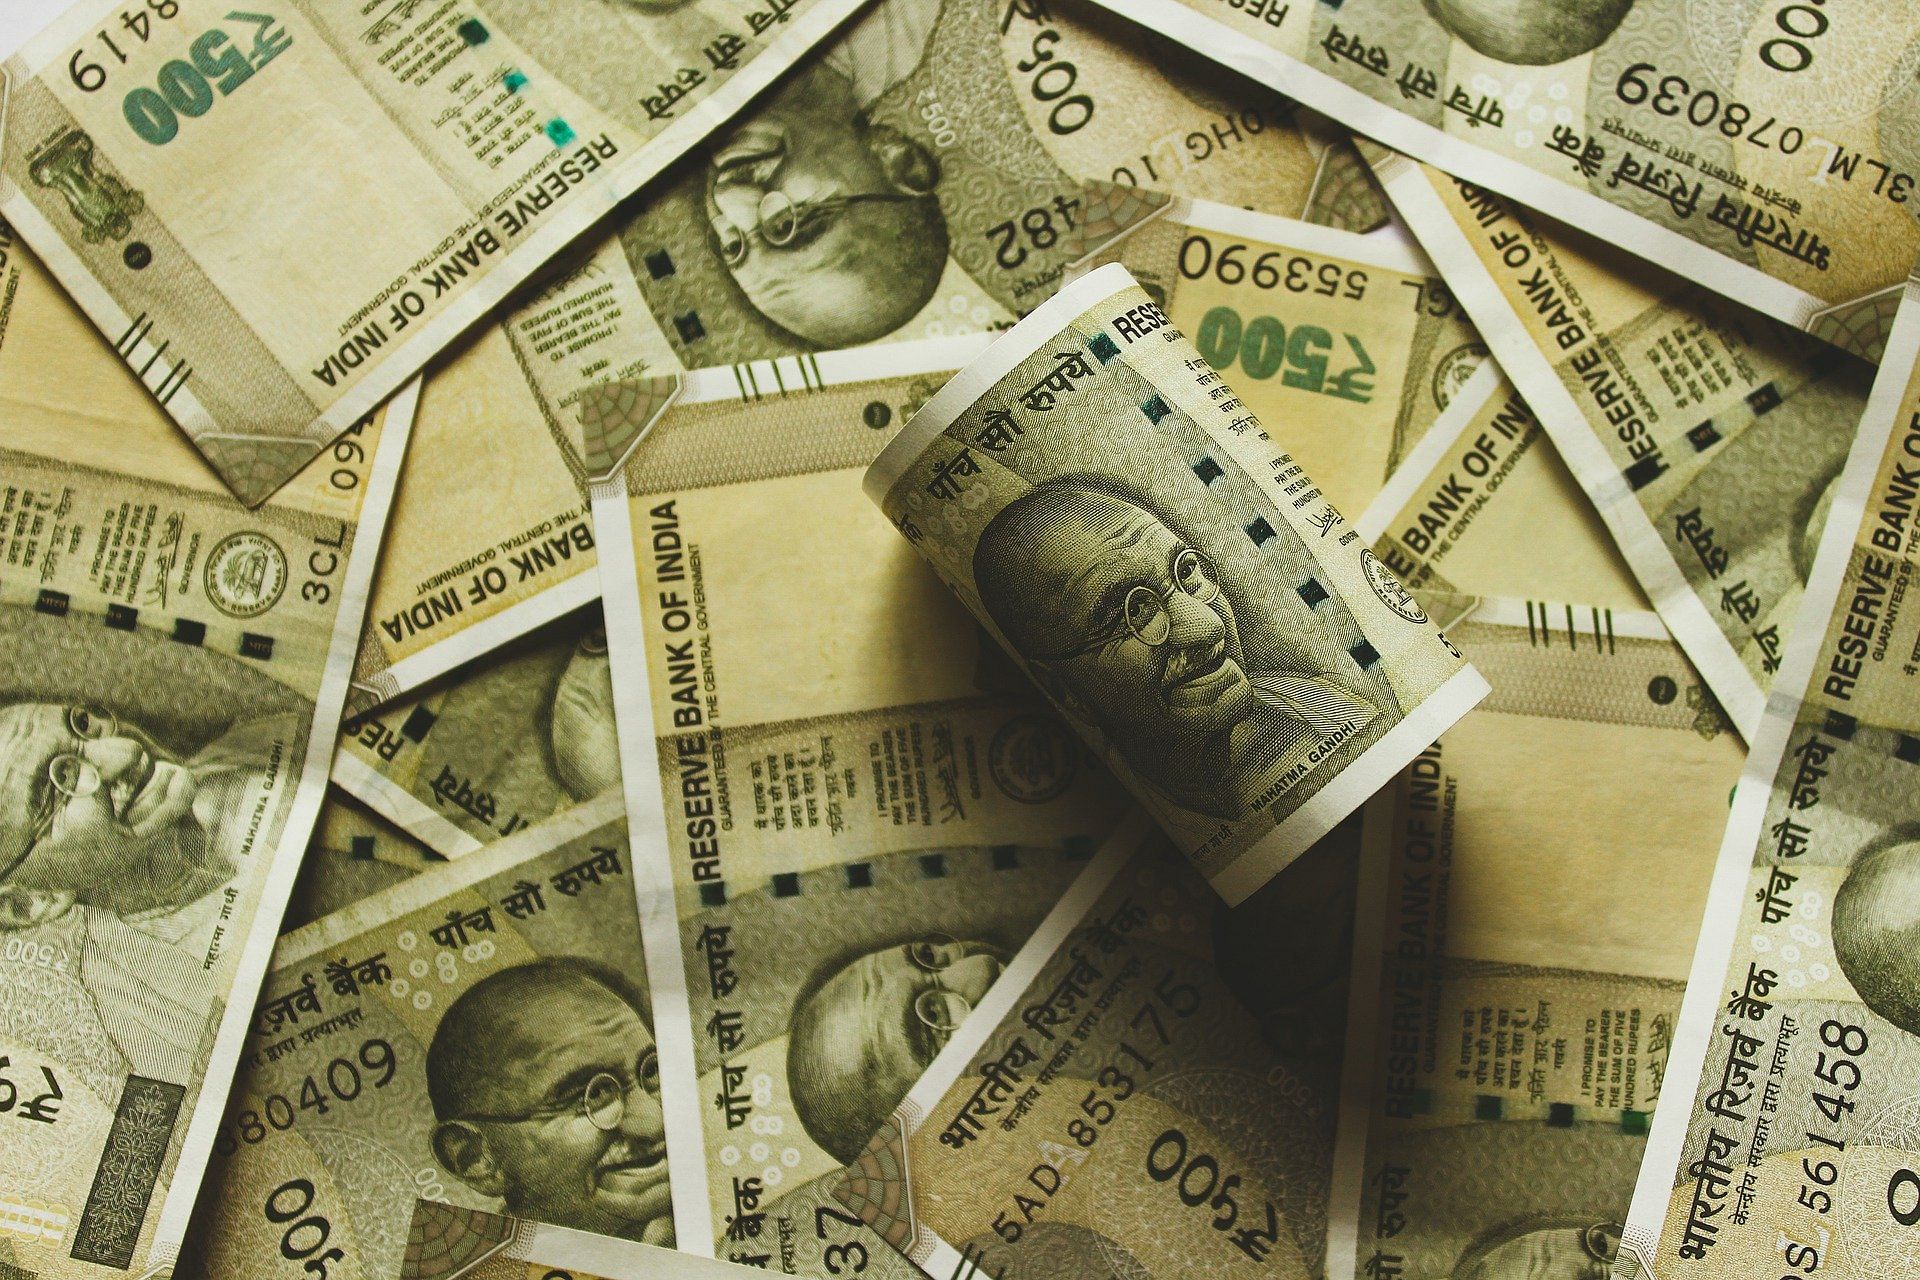 Indian borrowers have been rushing bond deals to market in recent weeks, after government and central bank measures to support companies pushed the average yield on rupee notes to the lowest since 2004 earlier this month. Representative image/Credit: Pixabay Image